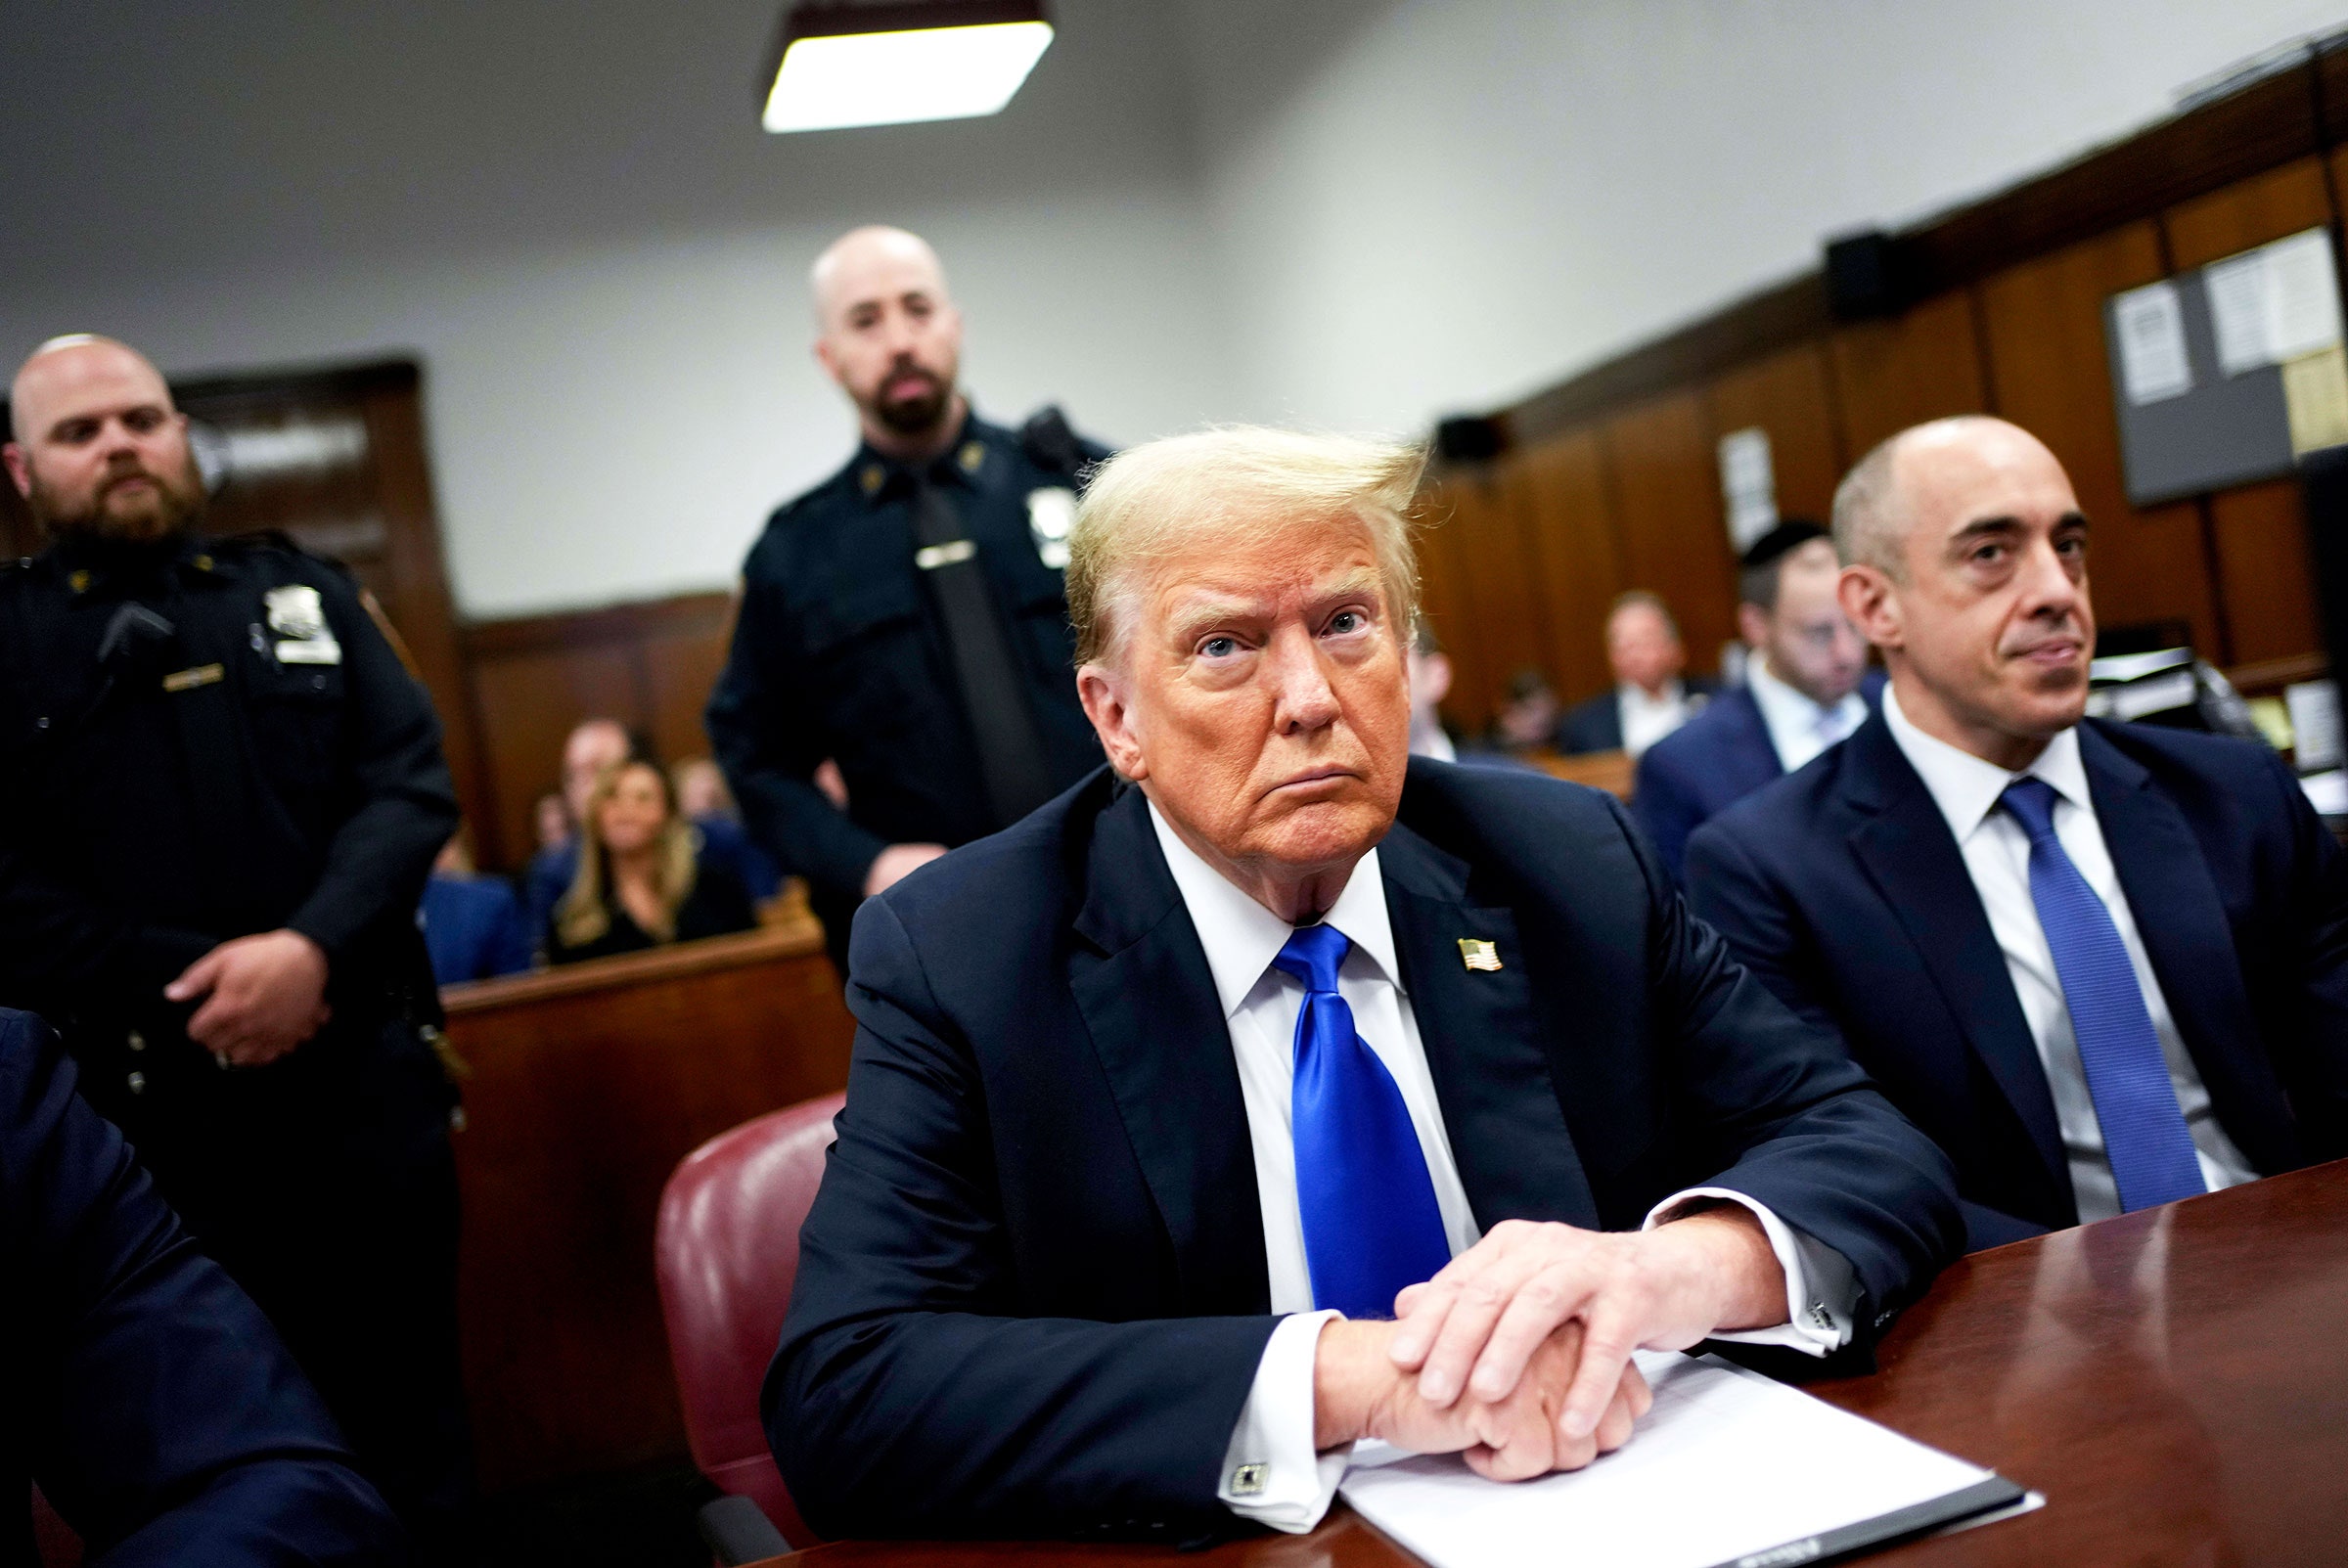 Donald Trump and his lawyer sitting at a desk in a court room with officers and onlookers behind them